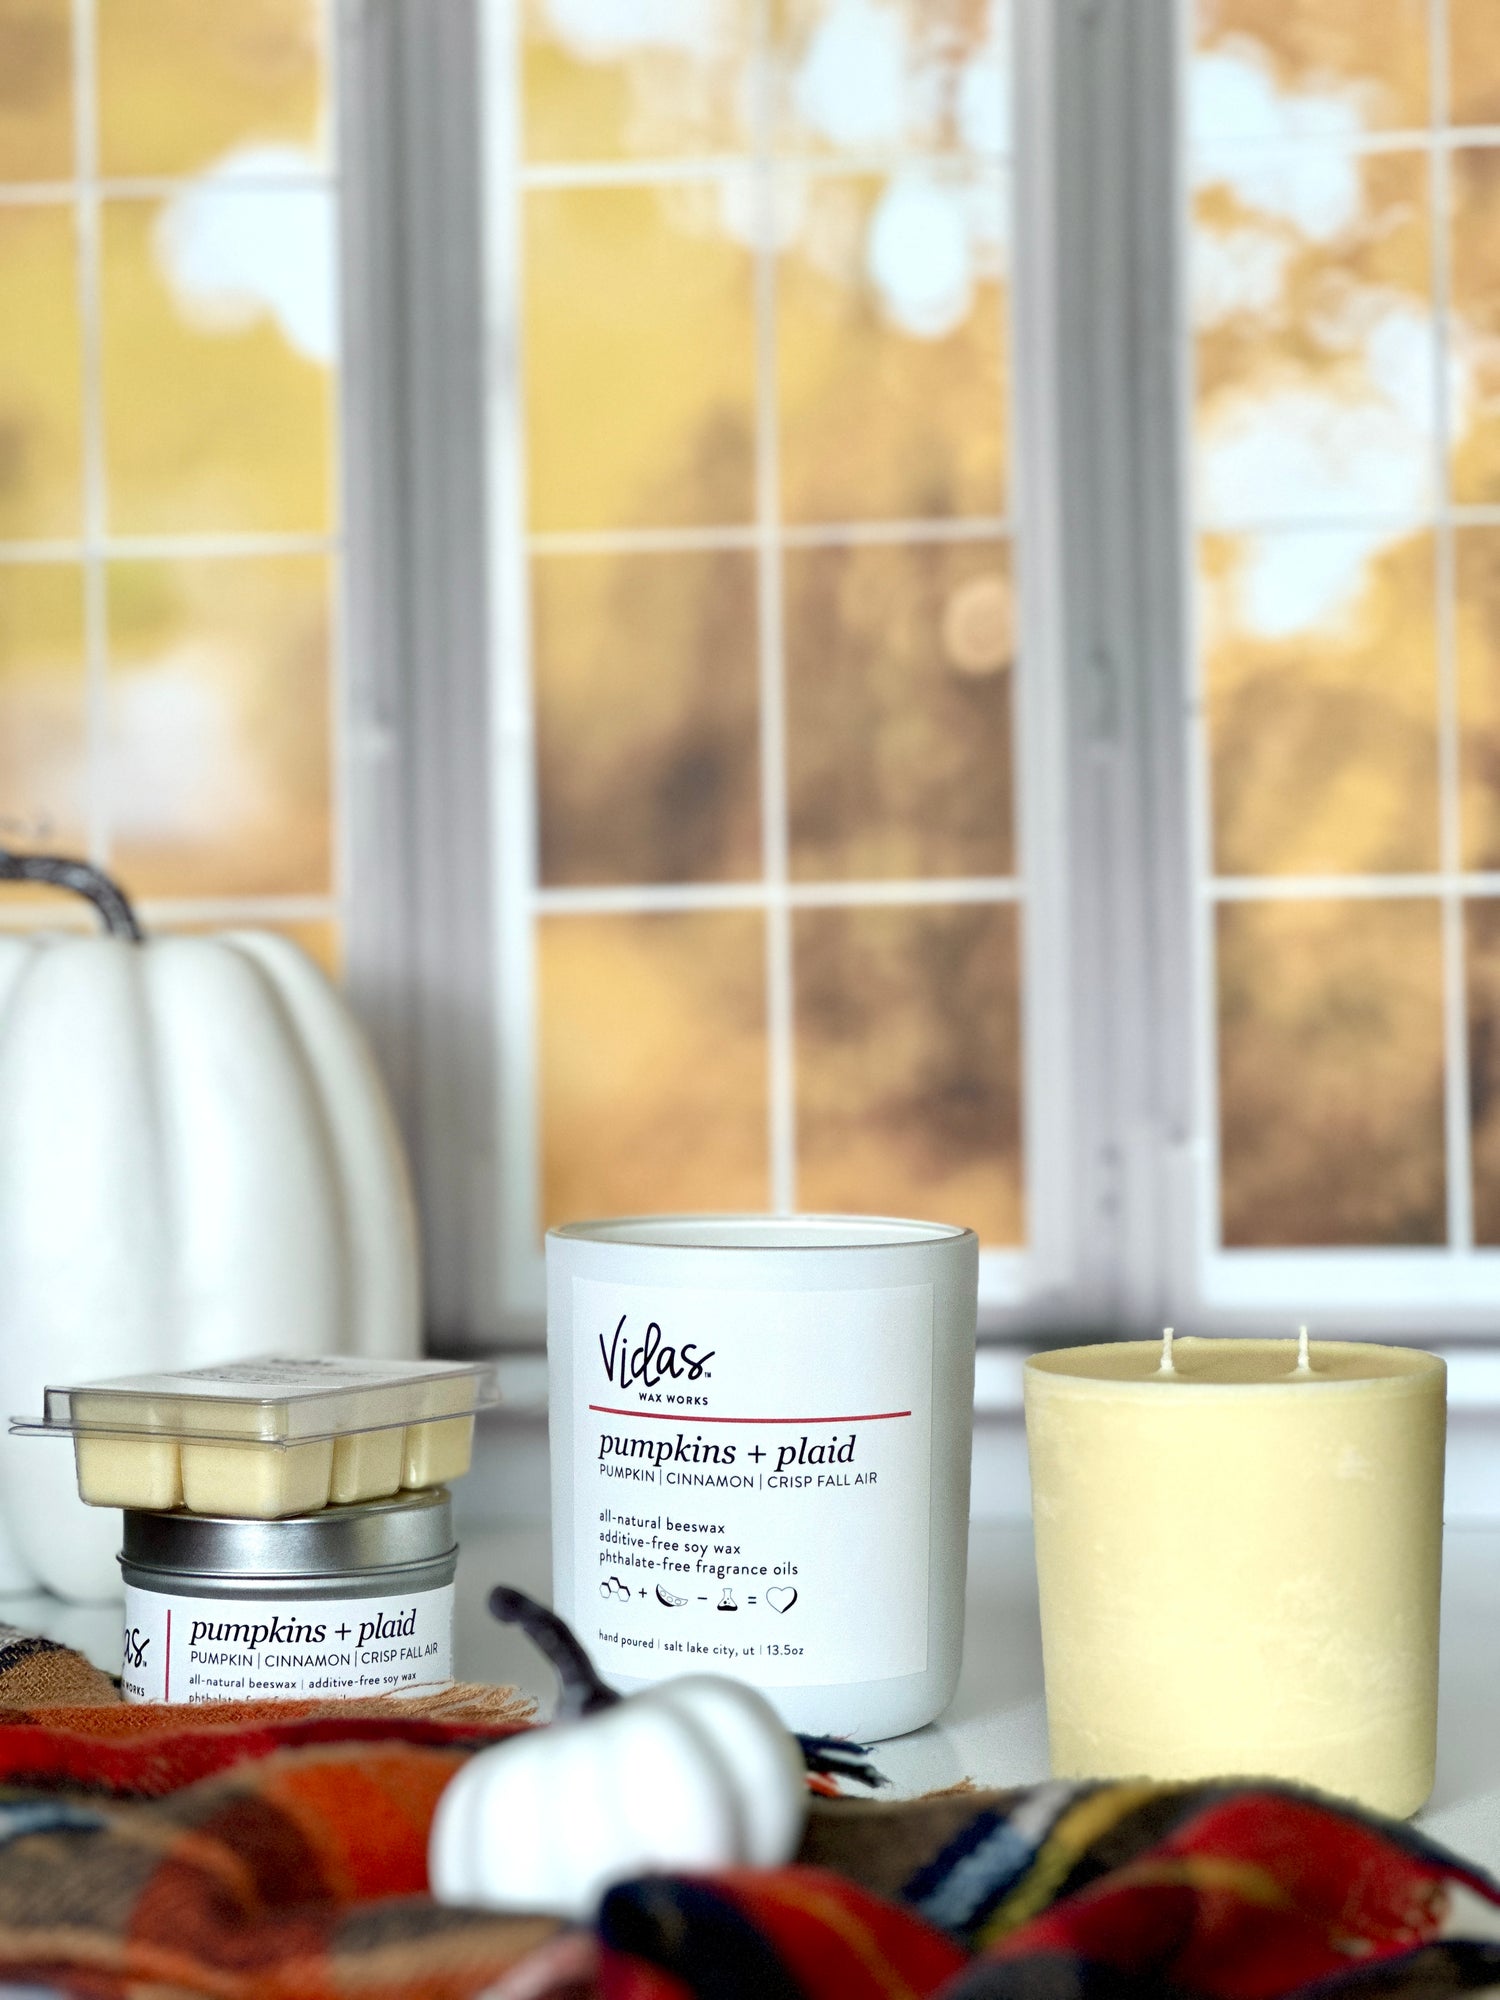 Embrace the autumn ambience with our "Pumpkins + Plaid" scent, a delightful blend of pumpkin, cinnamon, and crisp fall air. Against a backdrop of blurred fall-colored leaves outside a window, the collection features a range of offerings: a 13.5oz candle in a chic matte white jar, a 13.5oz candle refill, a compact 3.5oz candle tin, and dainty 2.5oz wax melts. A symphony of scents to elevate your seasonal moments.